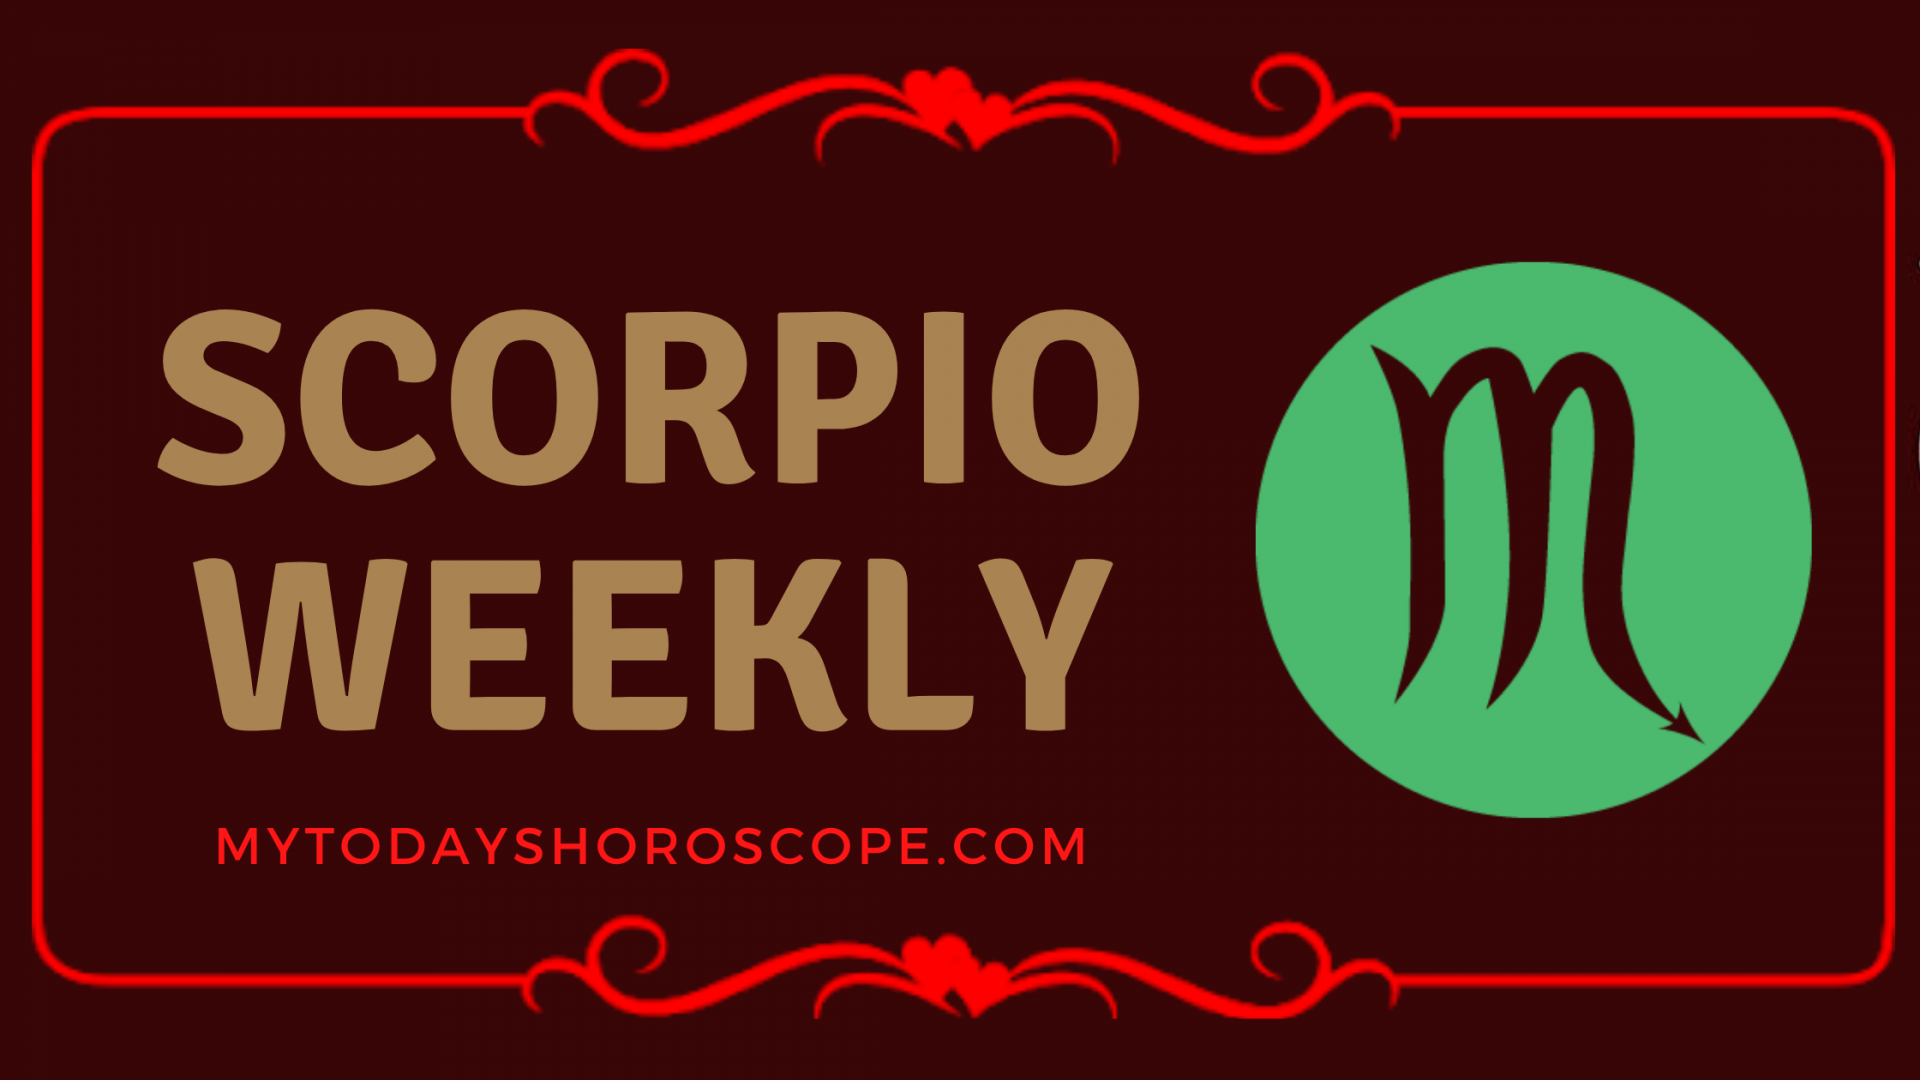 Scorpio weekly horoscope (April 19 - April 25): Predictions for Love, Money, Career and Health